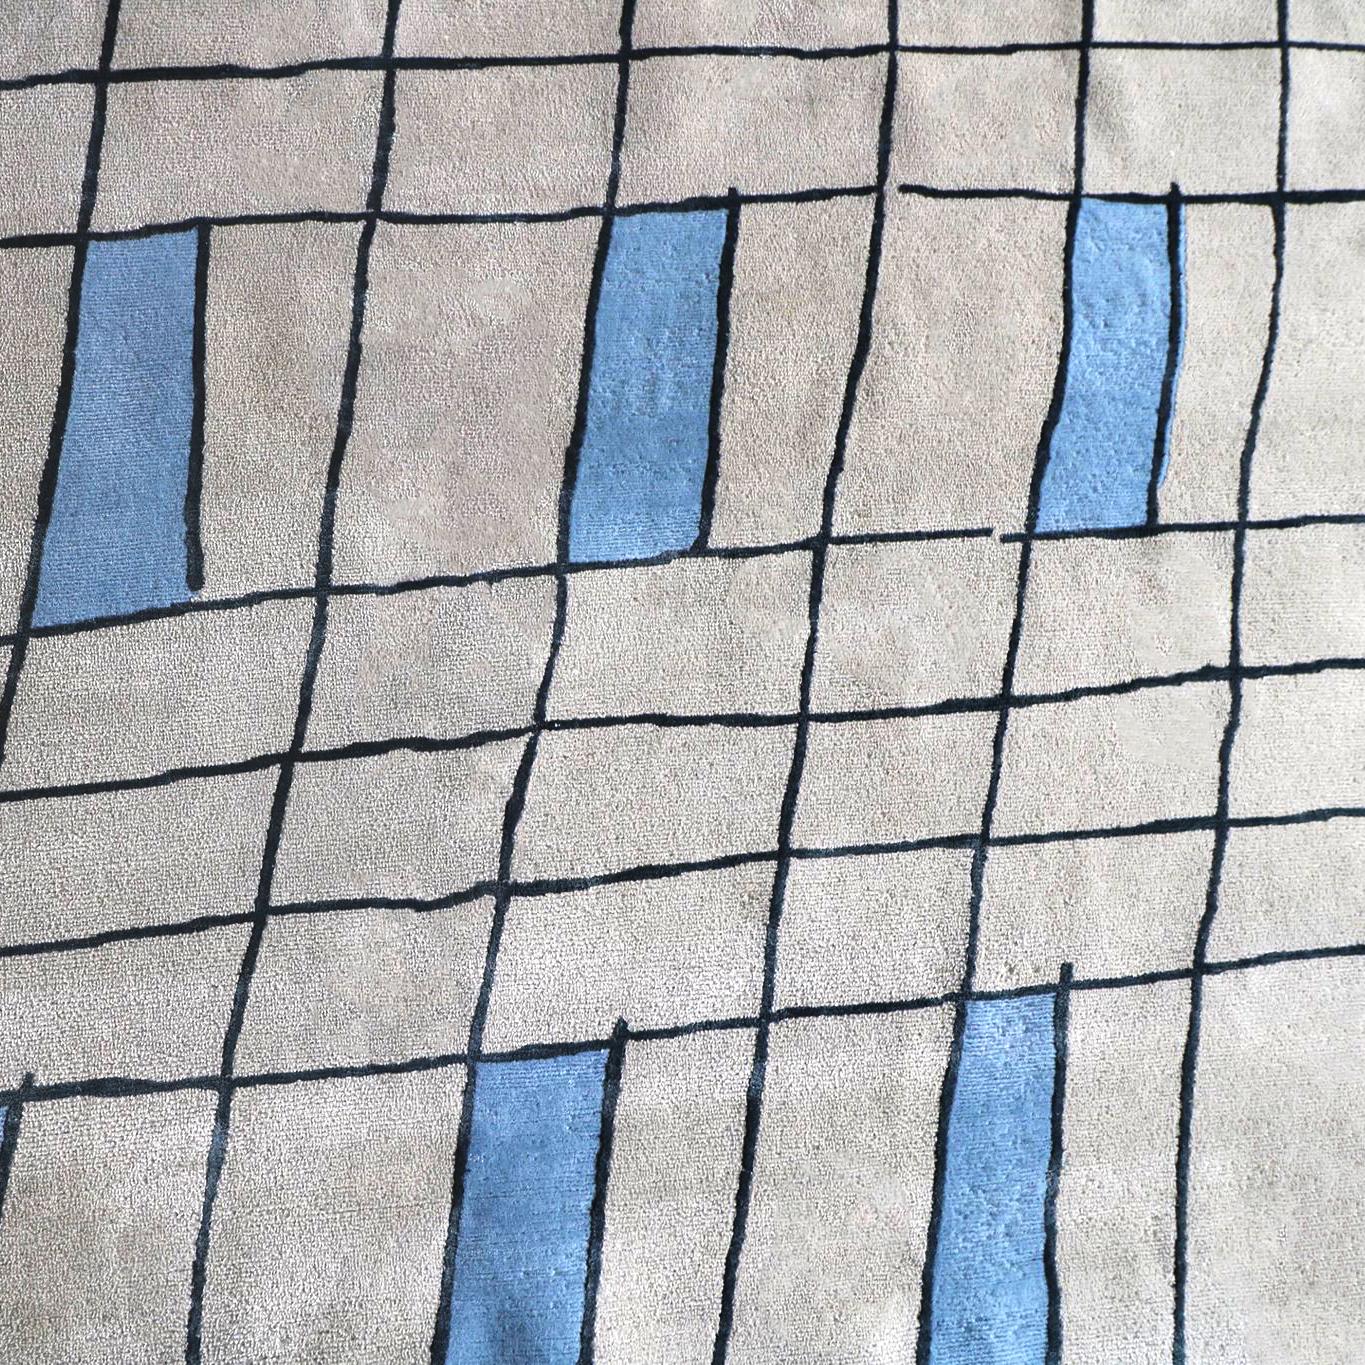 The Aesthetics of Our Time
P44 rug of the Frozen collection is an avant-garde graphics made of silk and wool. The entire canvas is lined with oblique parallel lines forming sharp corners. You will have a complete illusion that these lines are